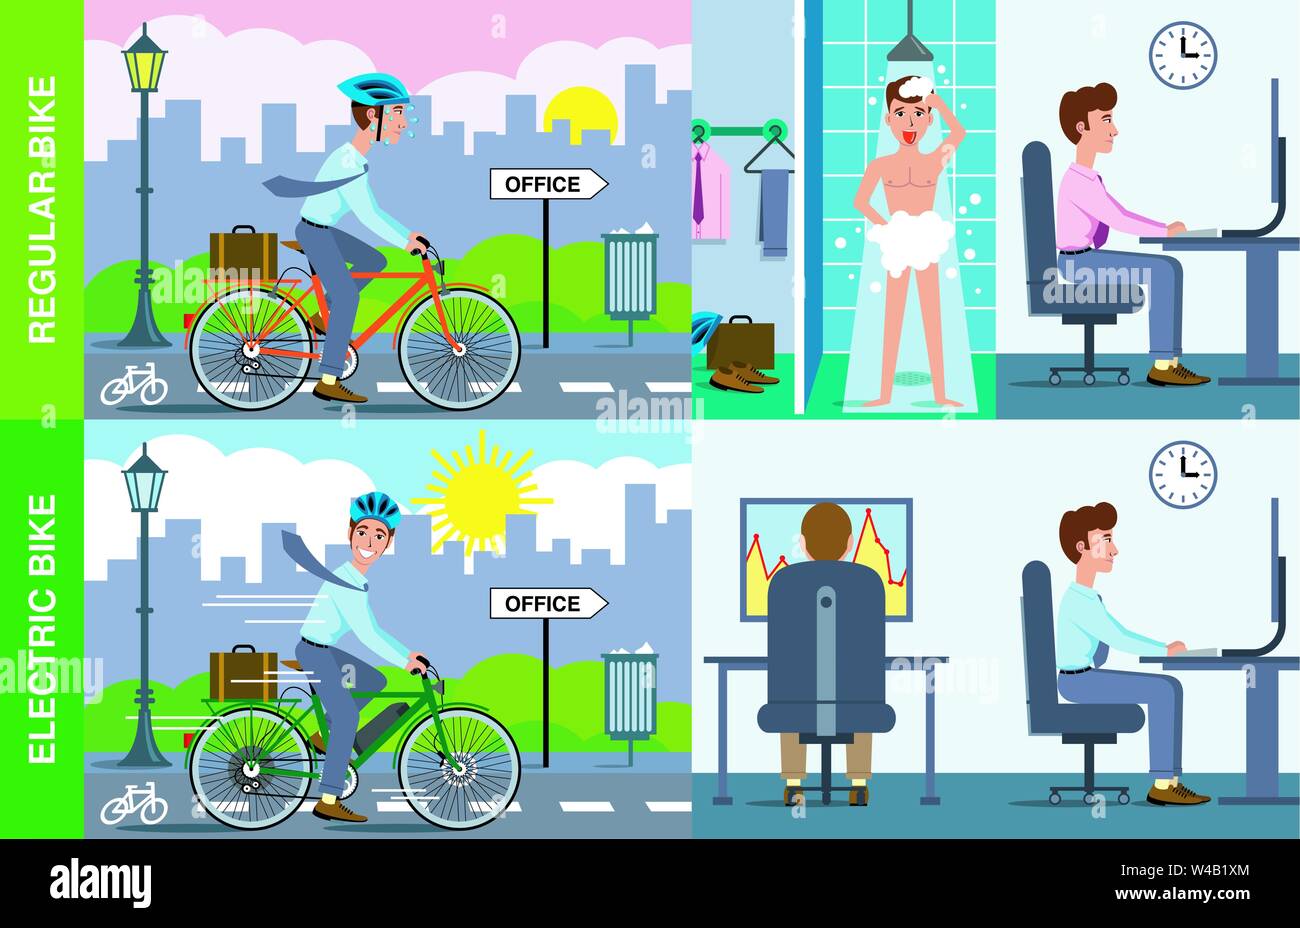 Illustration of man using normal bicycle to work, showering and sitting at office desk versus man using electric bike arrive at office ready to work. Stock Vector